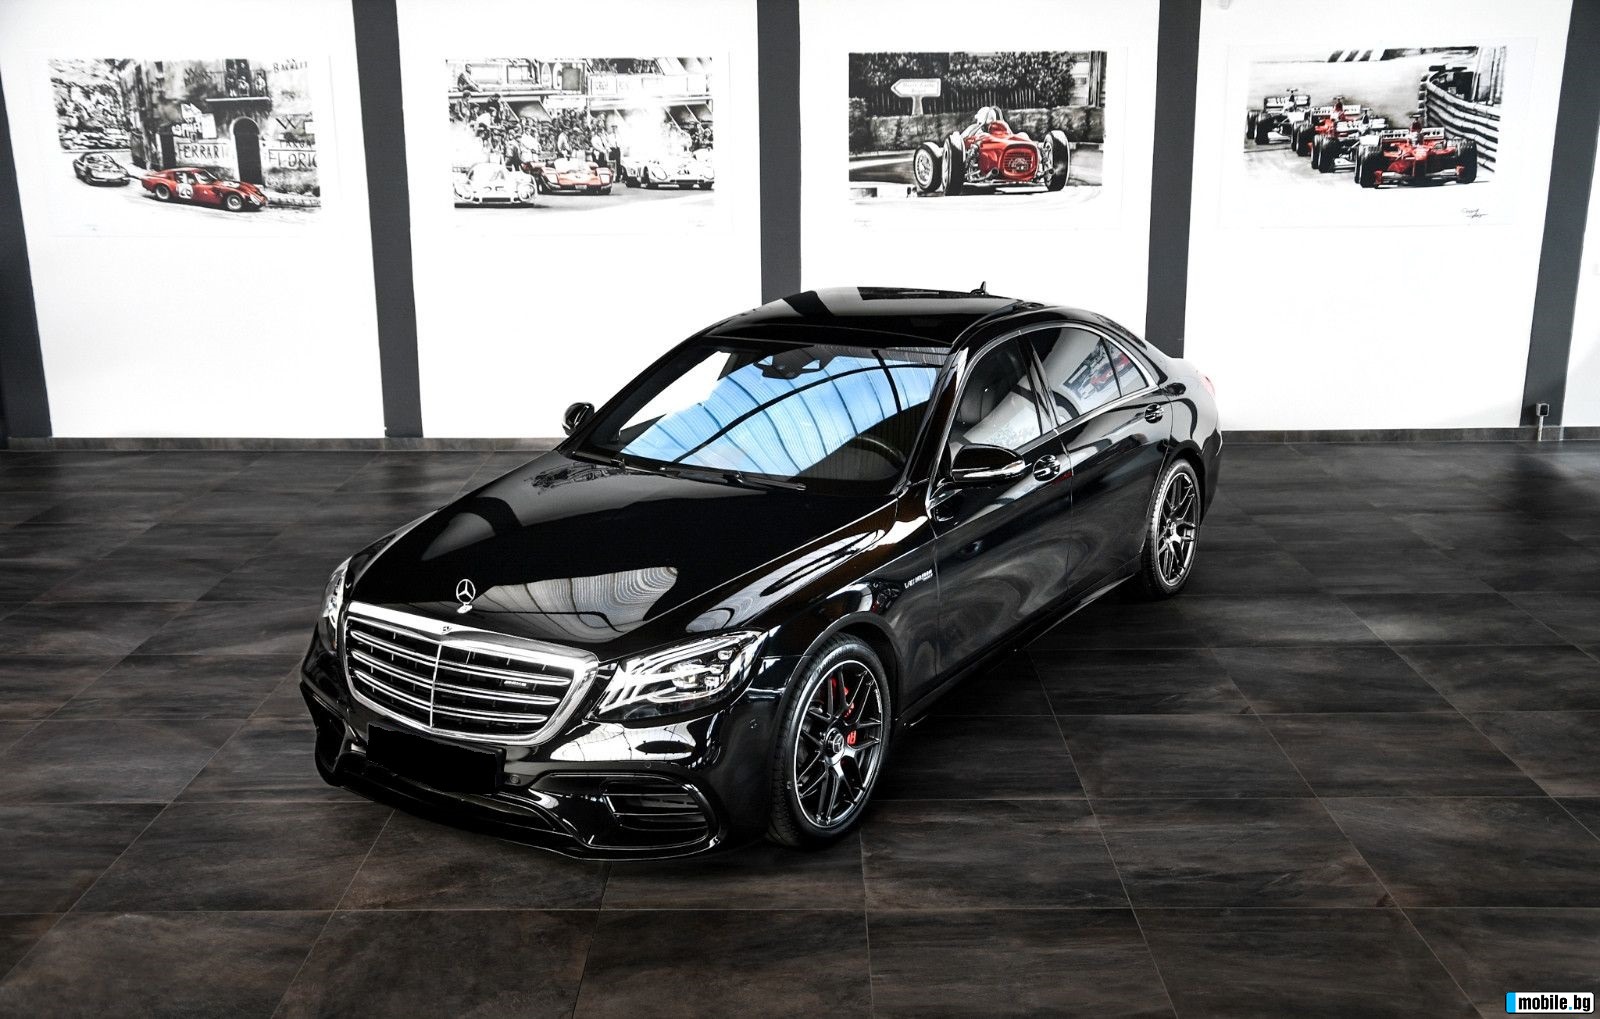 Mercedes-Benz S 63 AMG 4M+*LONG*EXCLUSIVE*PANO*NIGHT* | Mobile.bg   2